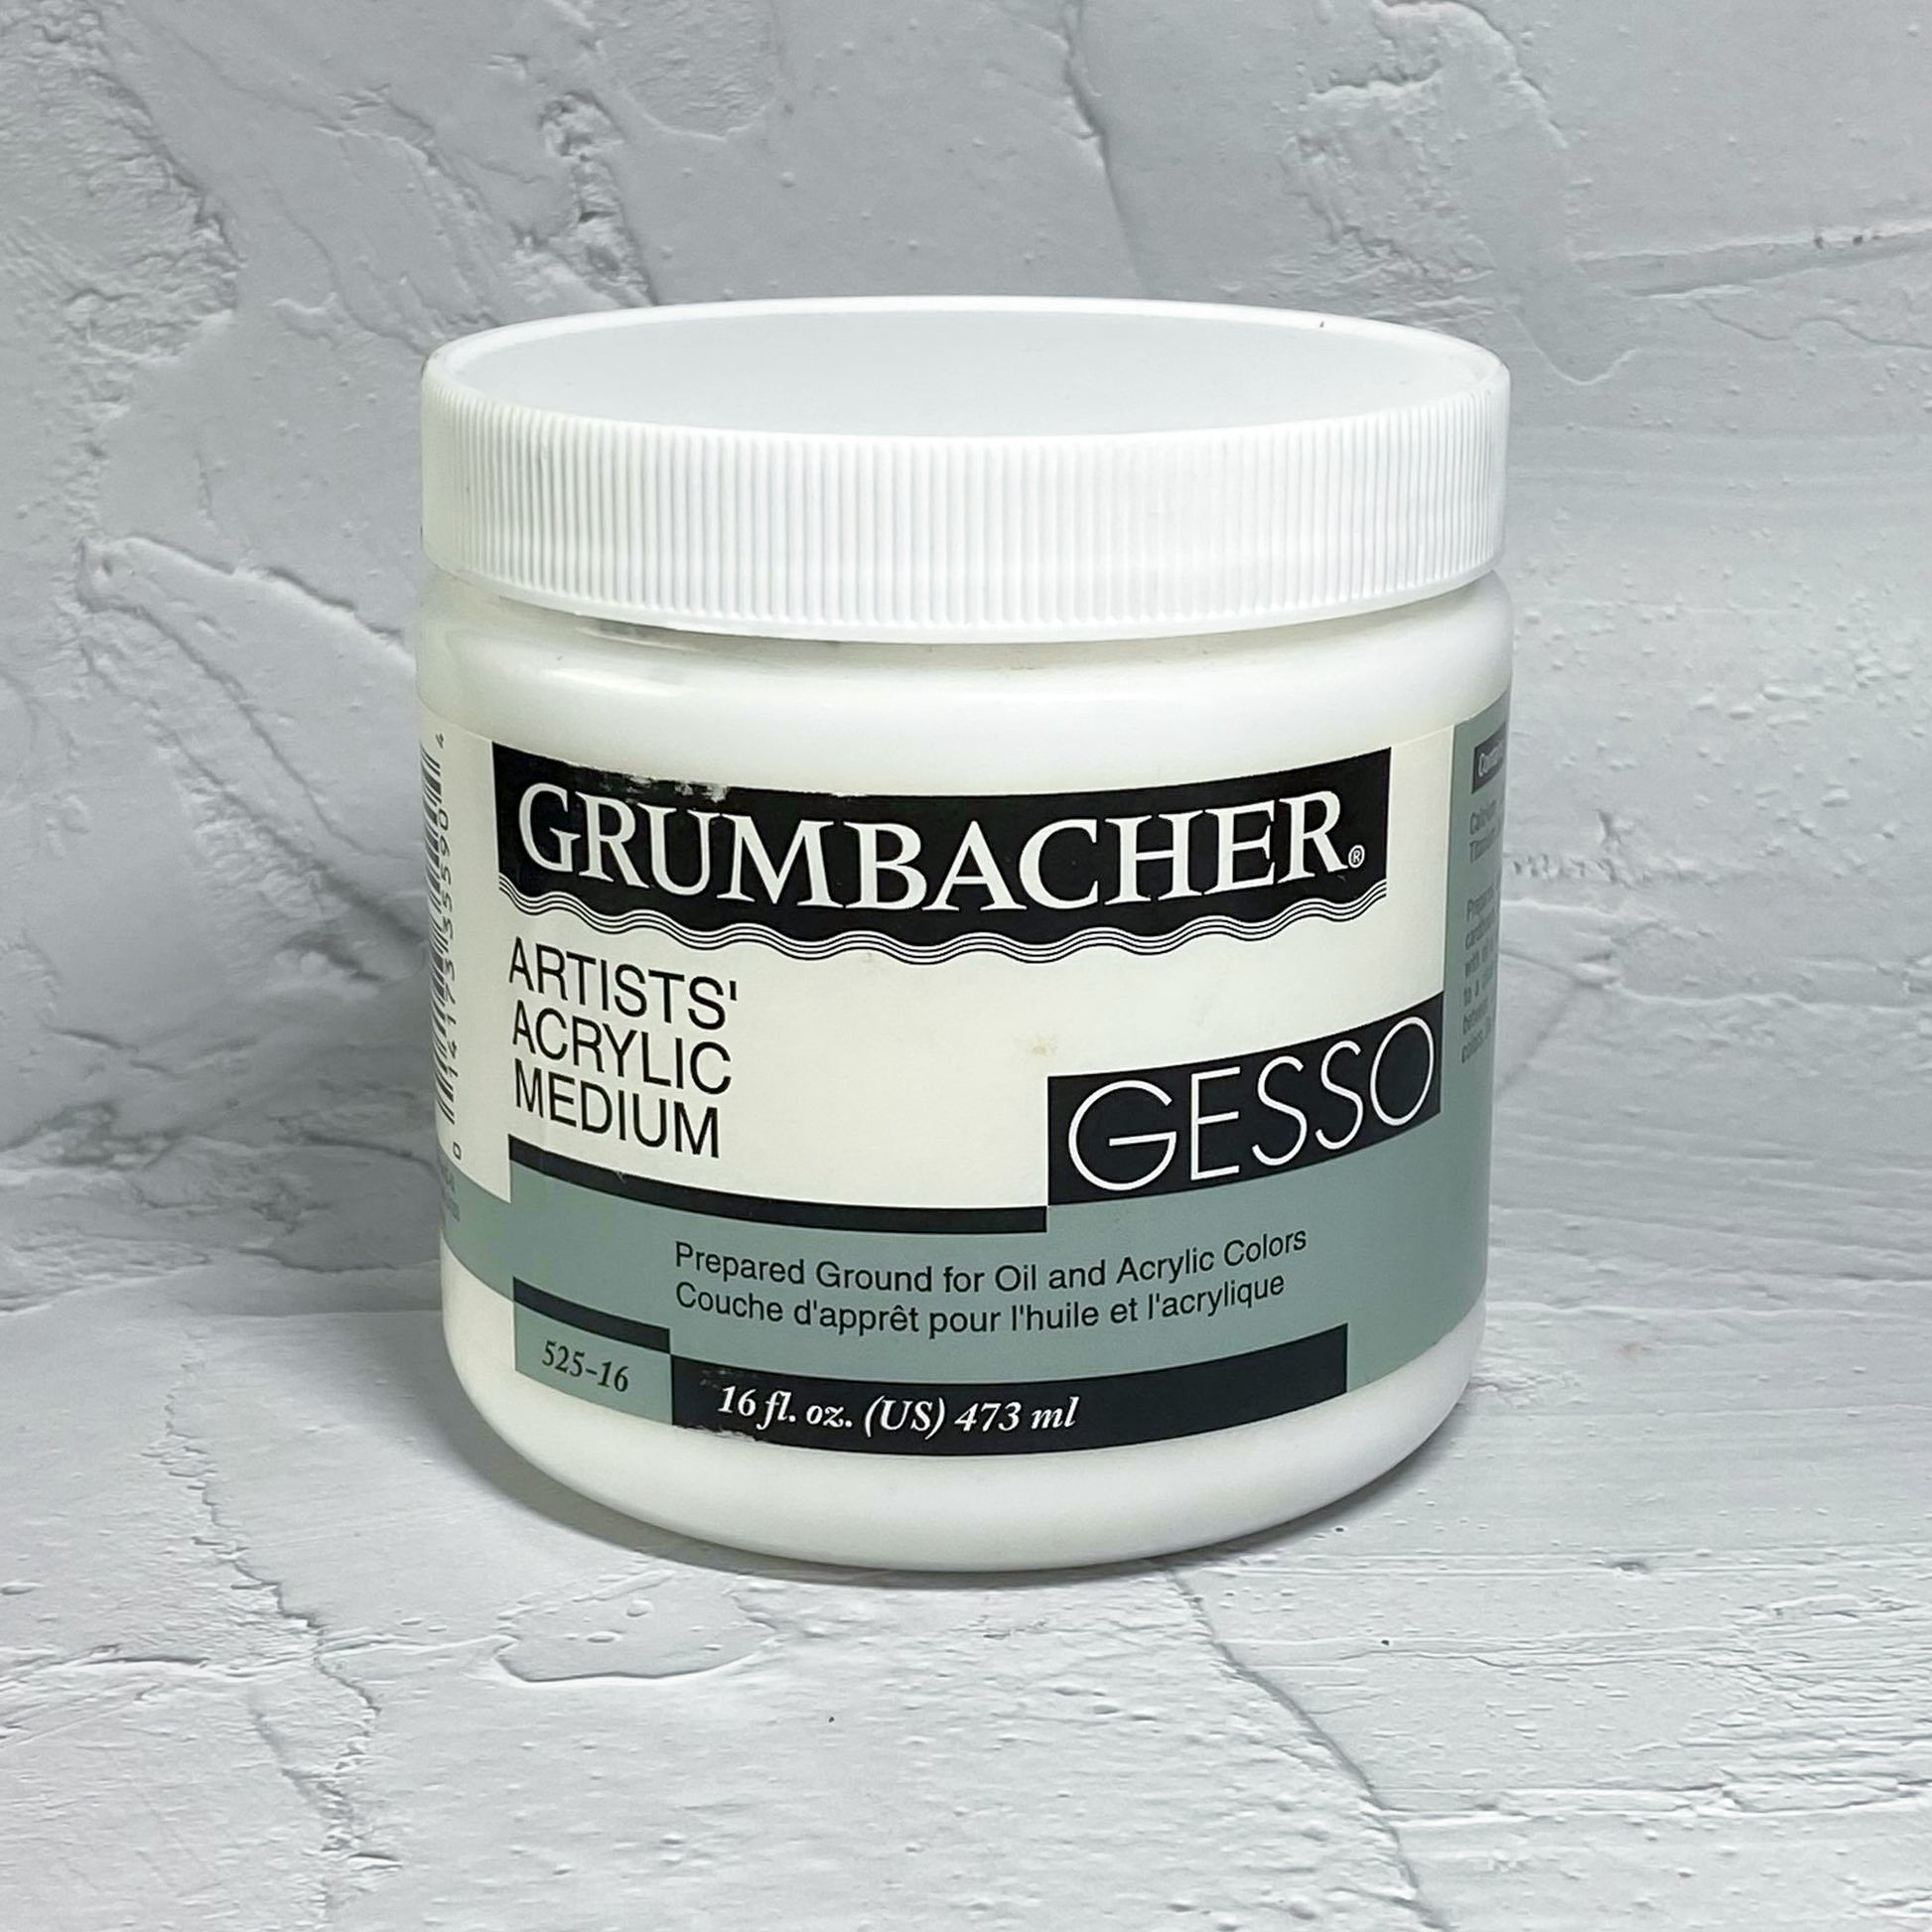 Grumbacher is known for the high quality of its thick-formula gesso. Use it to prepare canvas, wood, untempered pressed wood, cardboard, plaster, concrete, and masonry for painting with oil or acrylic colors. Grumbacher Acrylic Gesso may be thinned with water or tinted with acrylic paint to create a colored ground.  Project Workshop PH